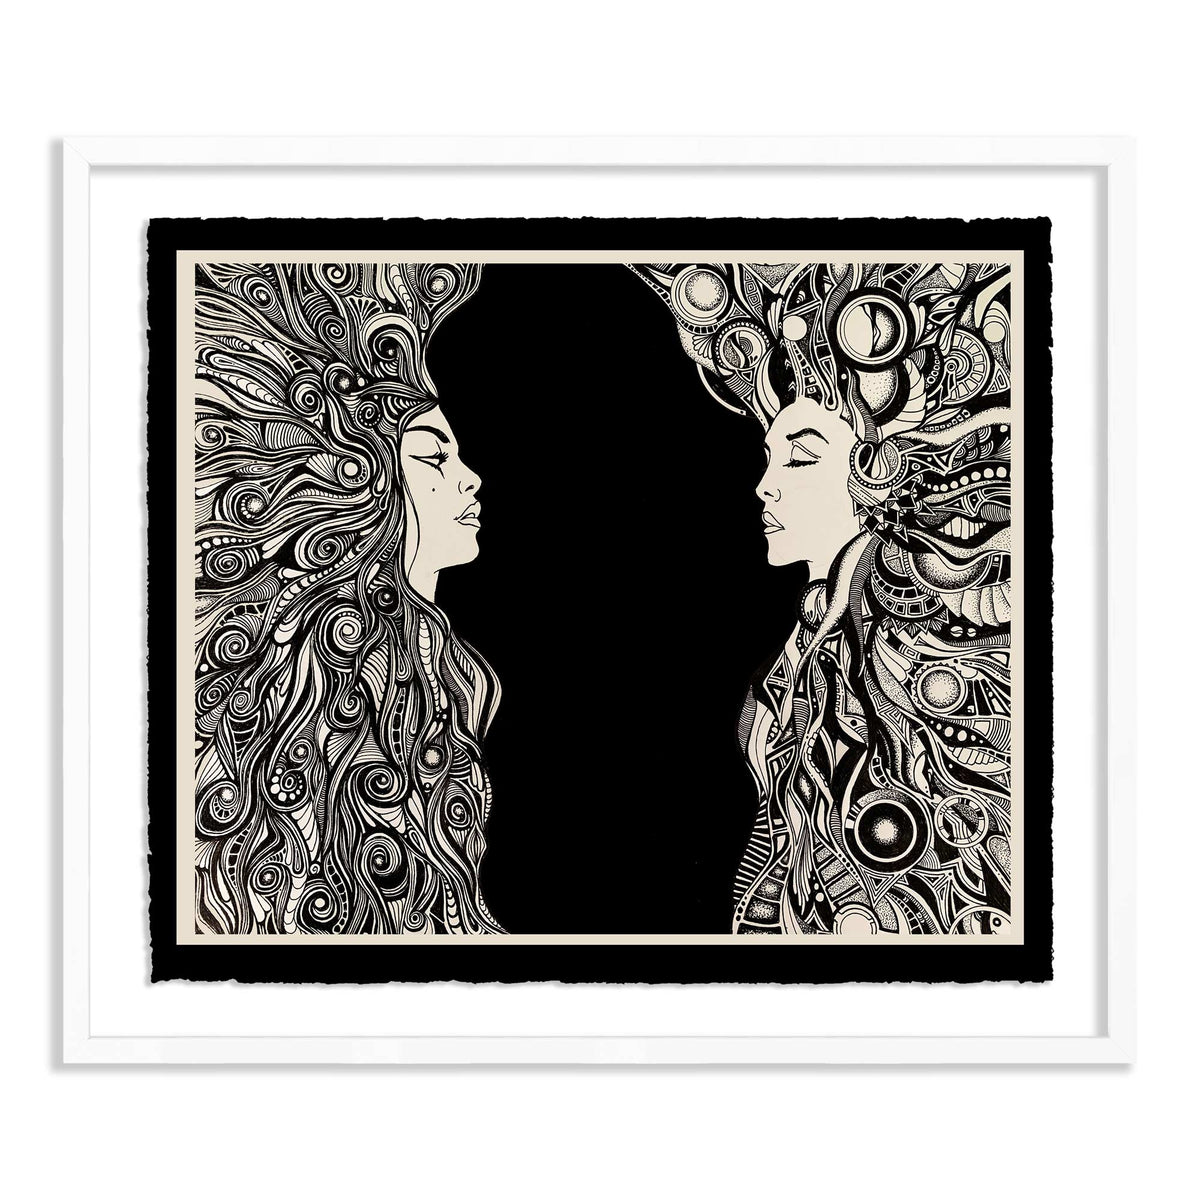 together - limited edition print